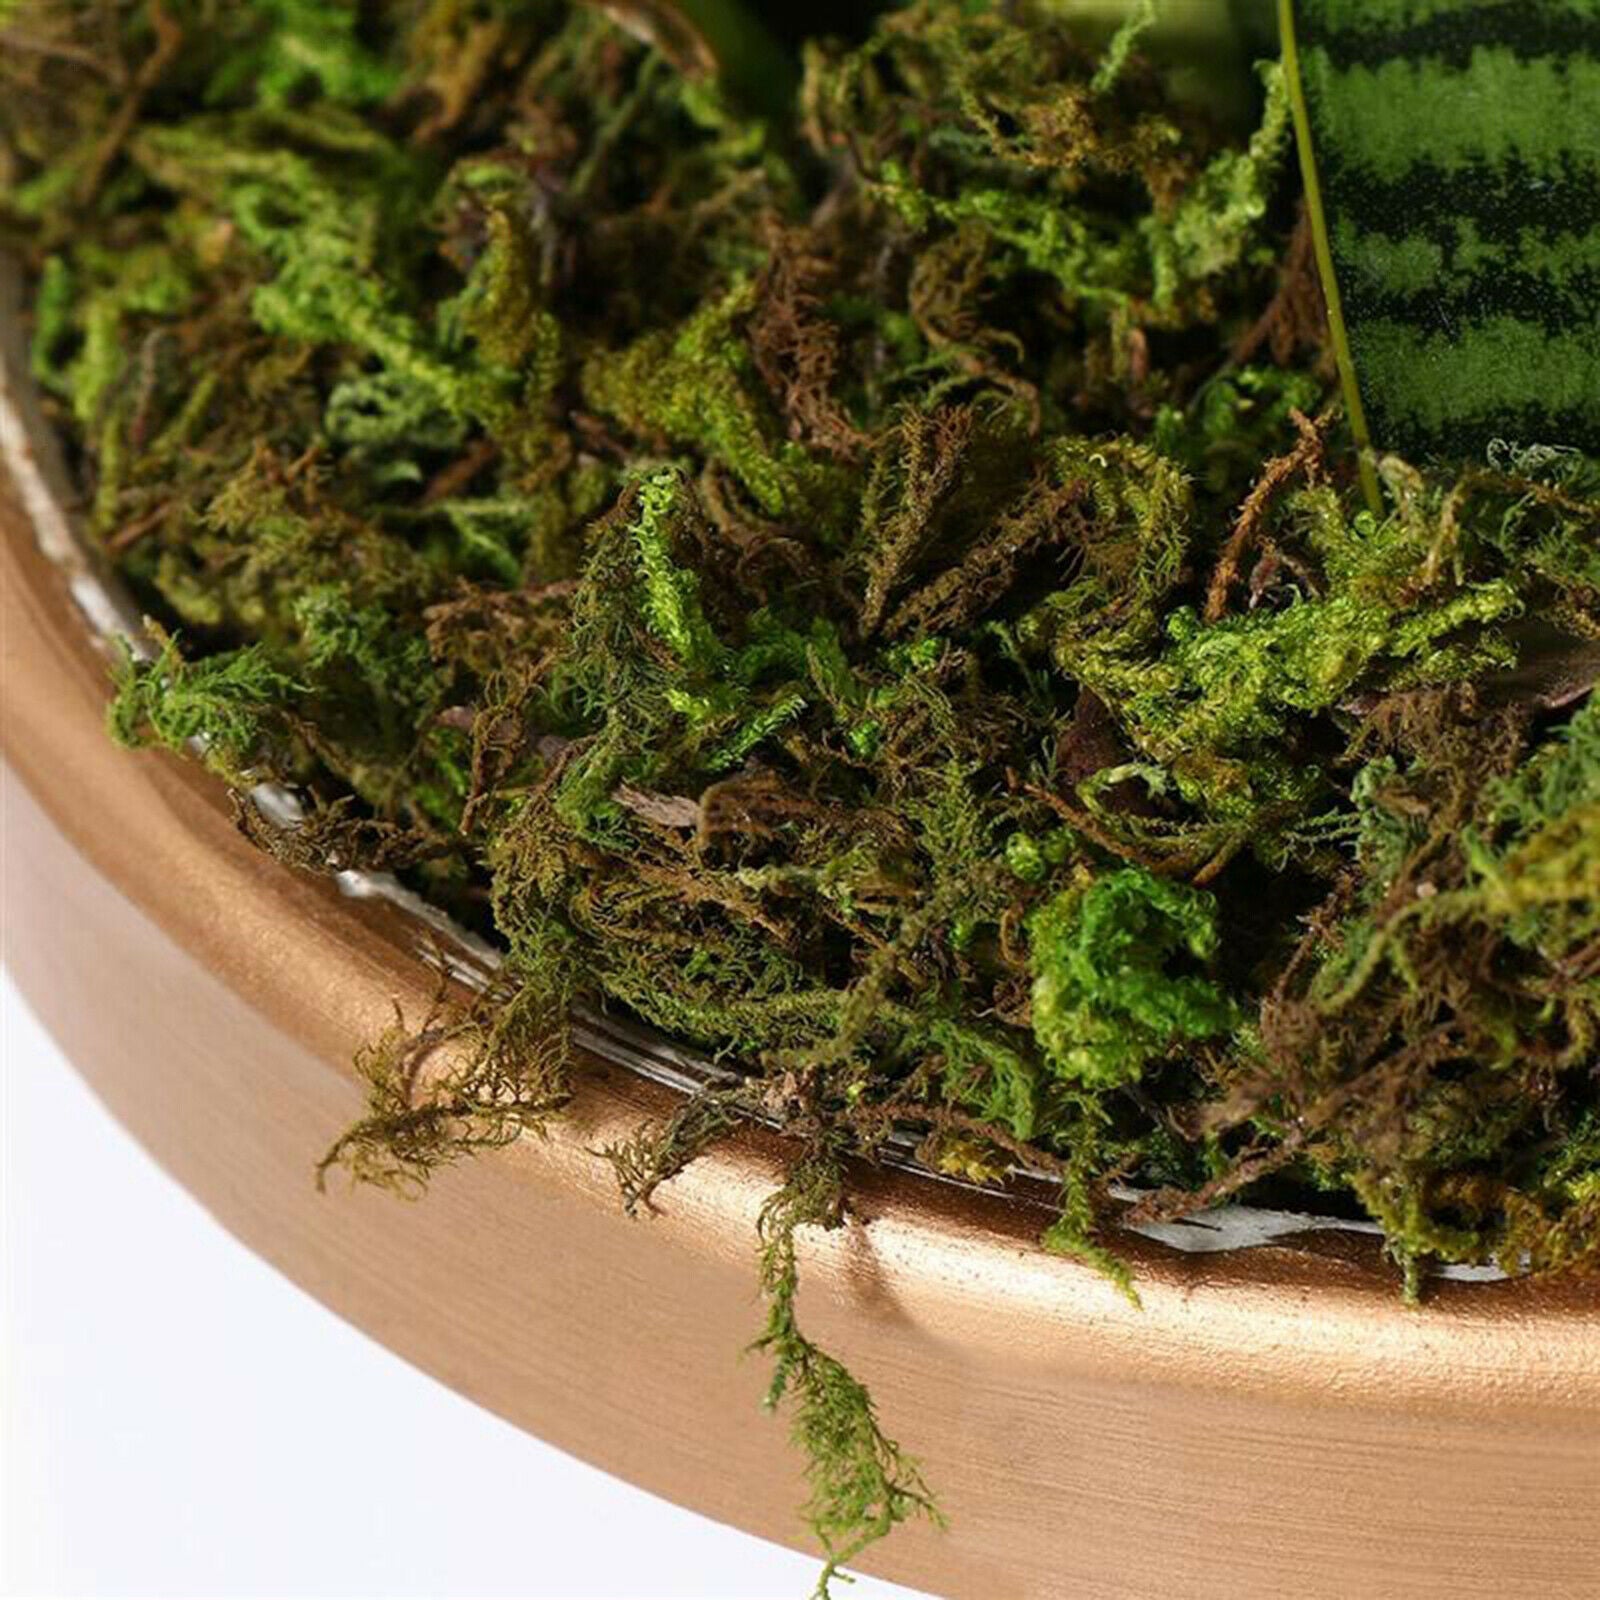 100g/bag Simulation Dry Moss Lawn Decor for Fairy Gardens Floral Project